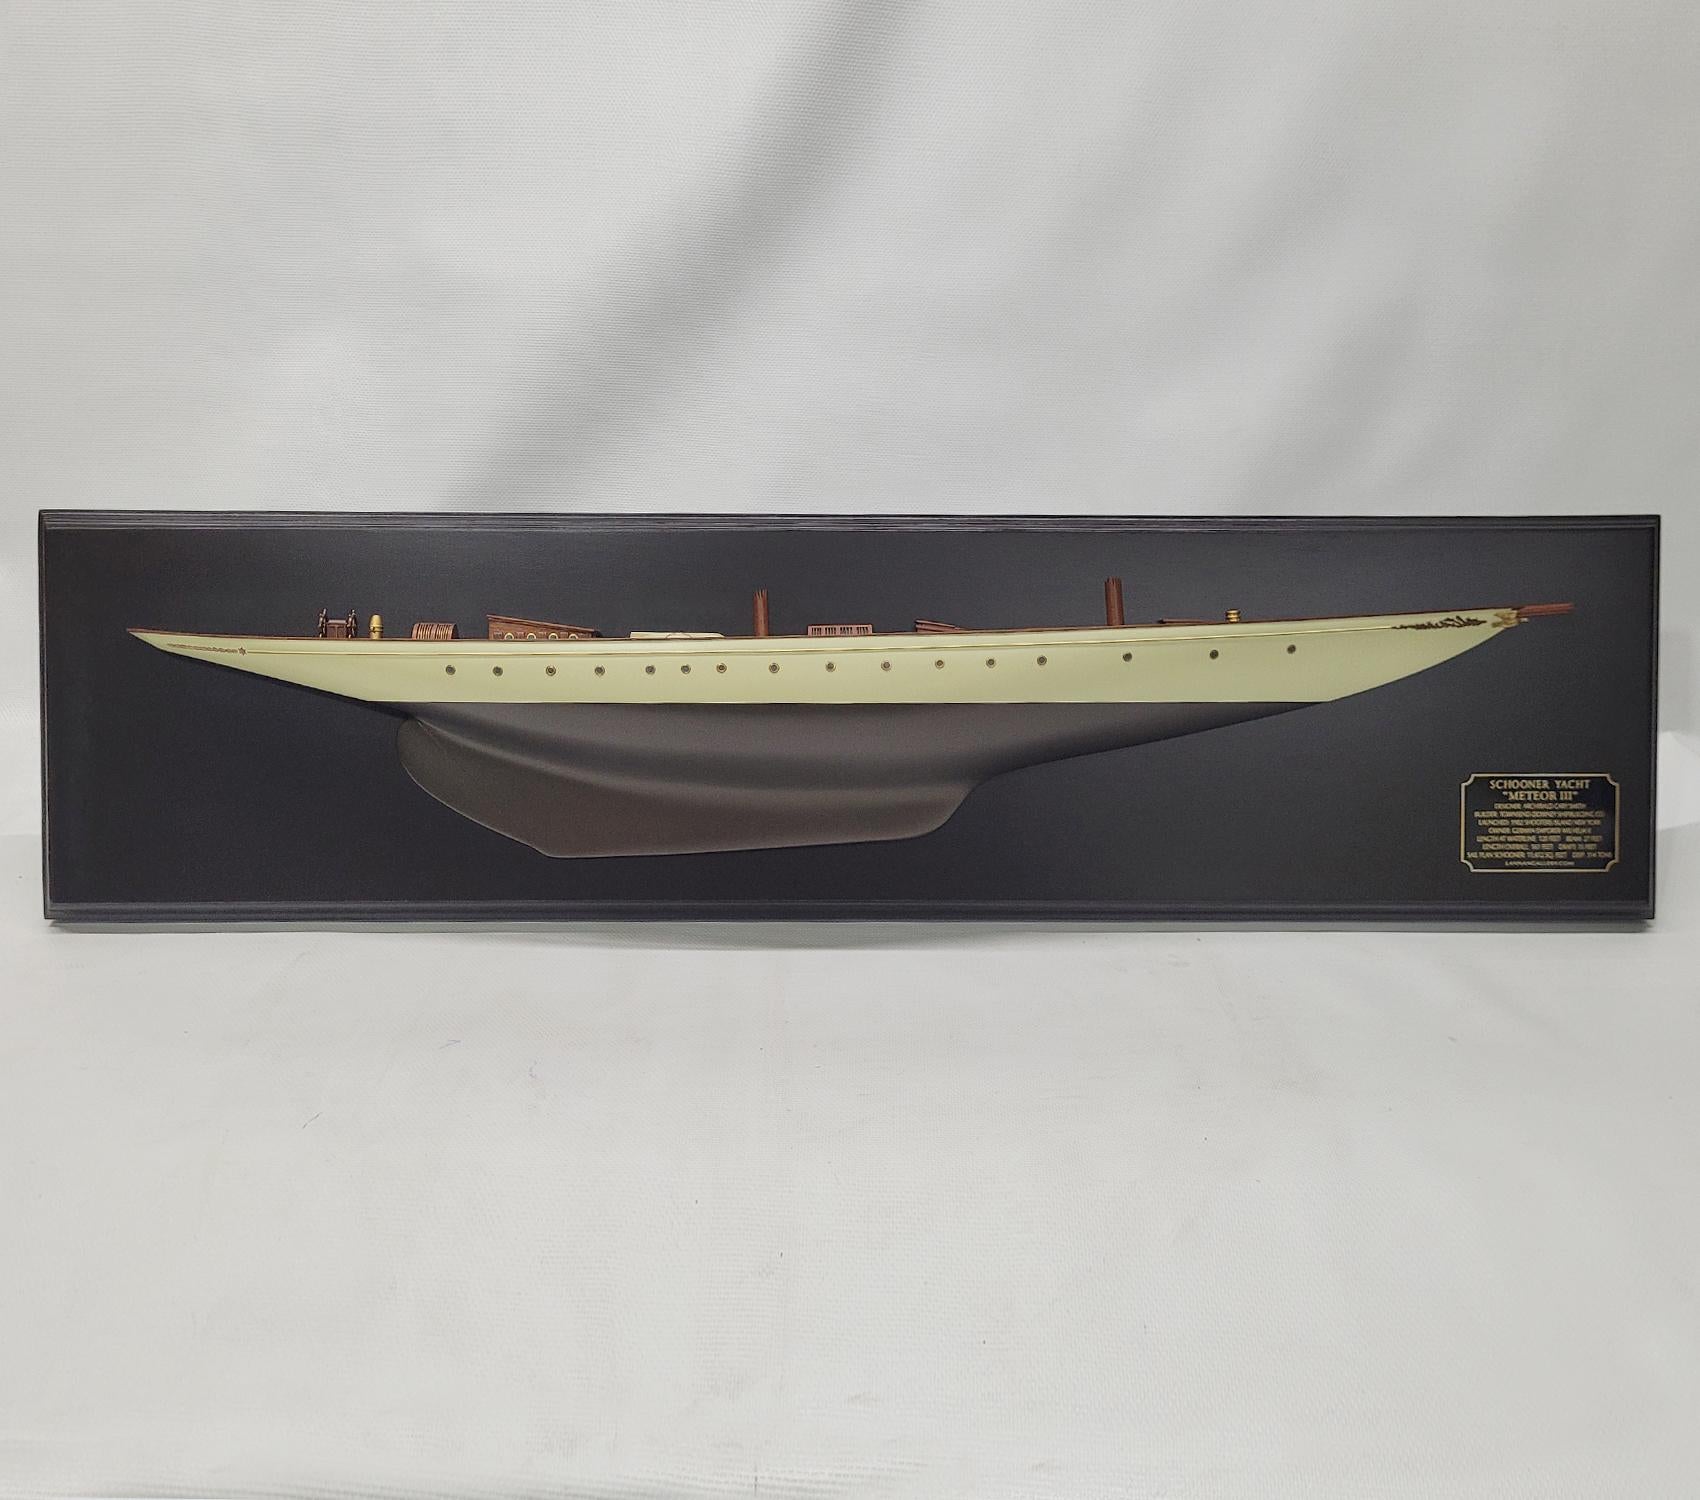 This model has exceptional deck detail with cabin, Many detailed skylights with brass bars, cabin, with brass porthole, deck fittings, stubbed masts, binnacle, helm, etc. The Hull is painted white over bronze and is fitted with a row of turned brass